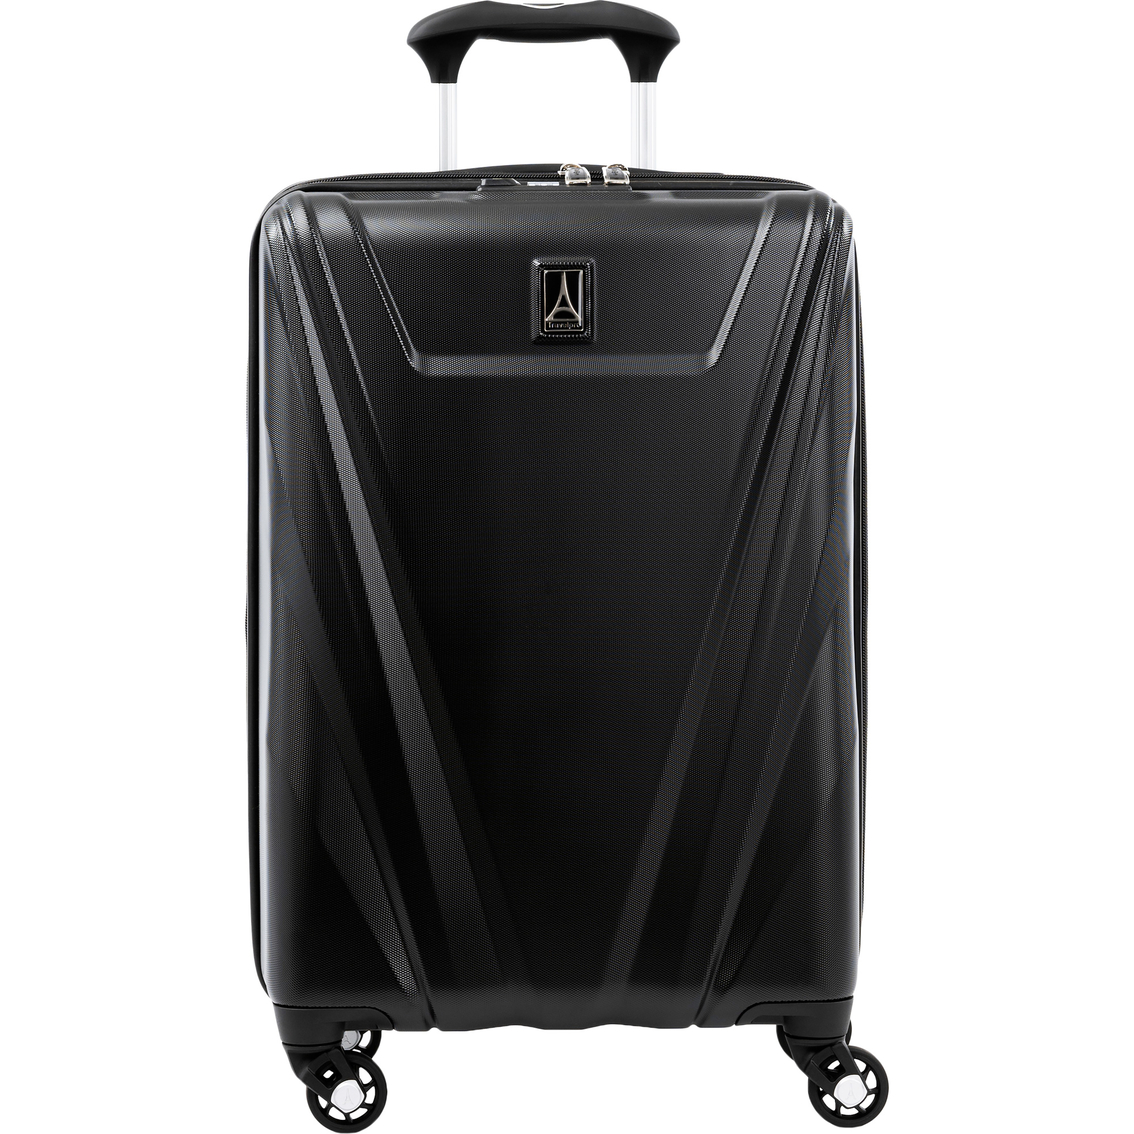 Travelpro Maxlite 5 Expandable Carry On Hard Side Spinner